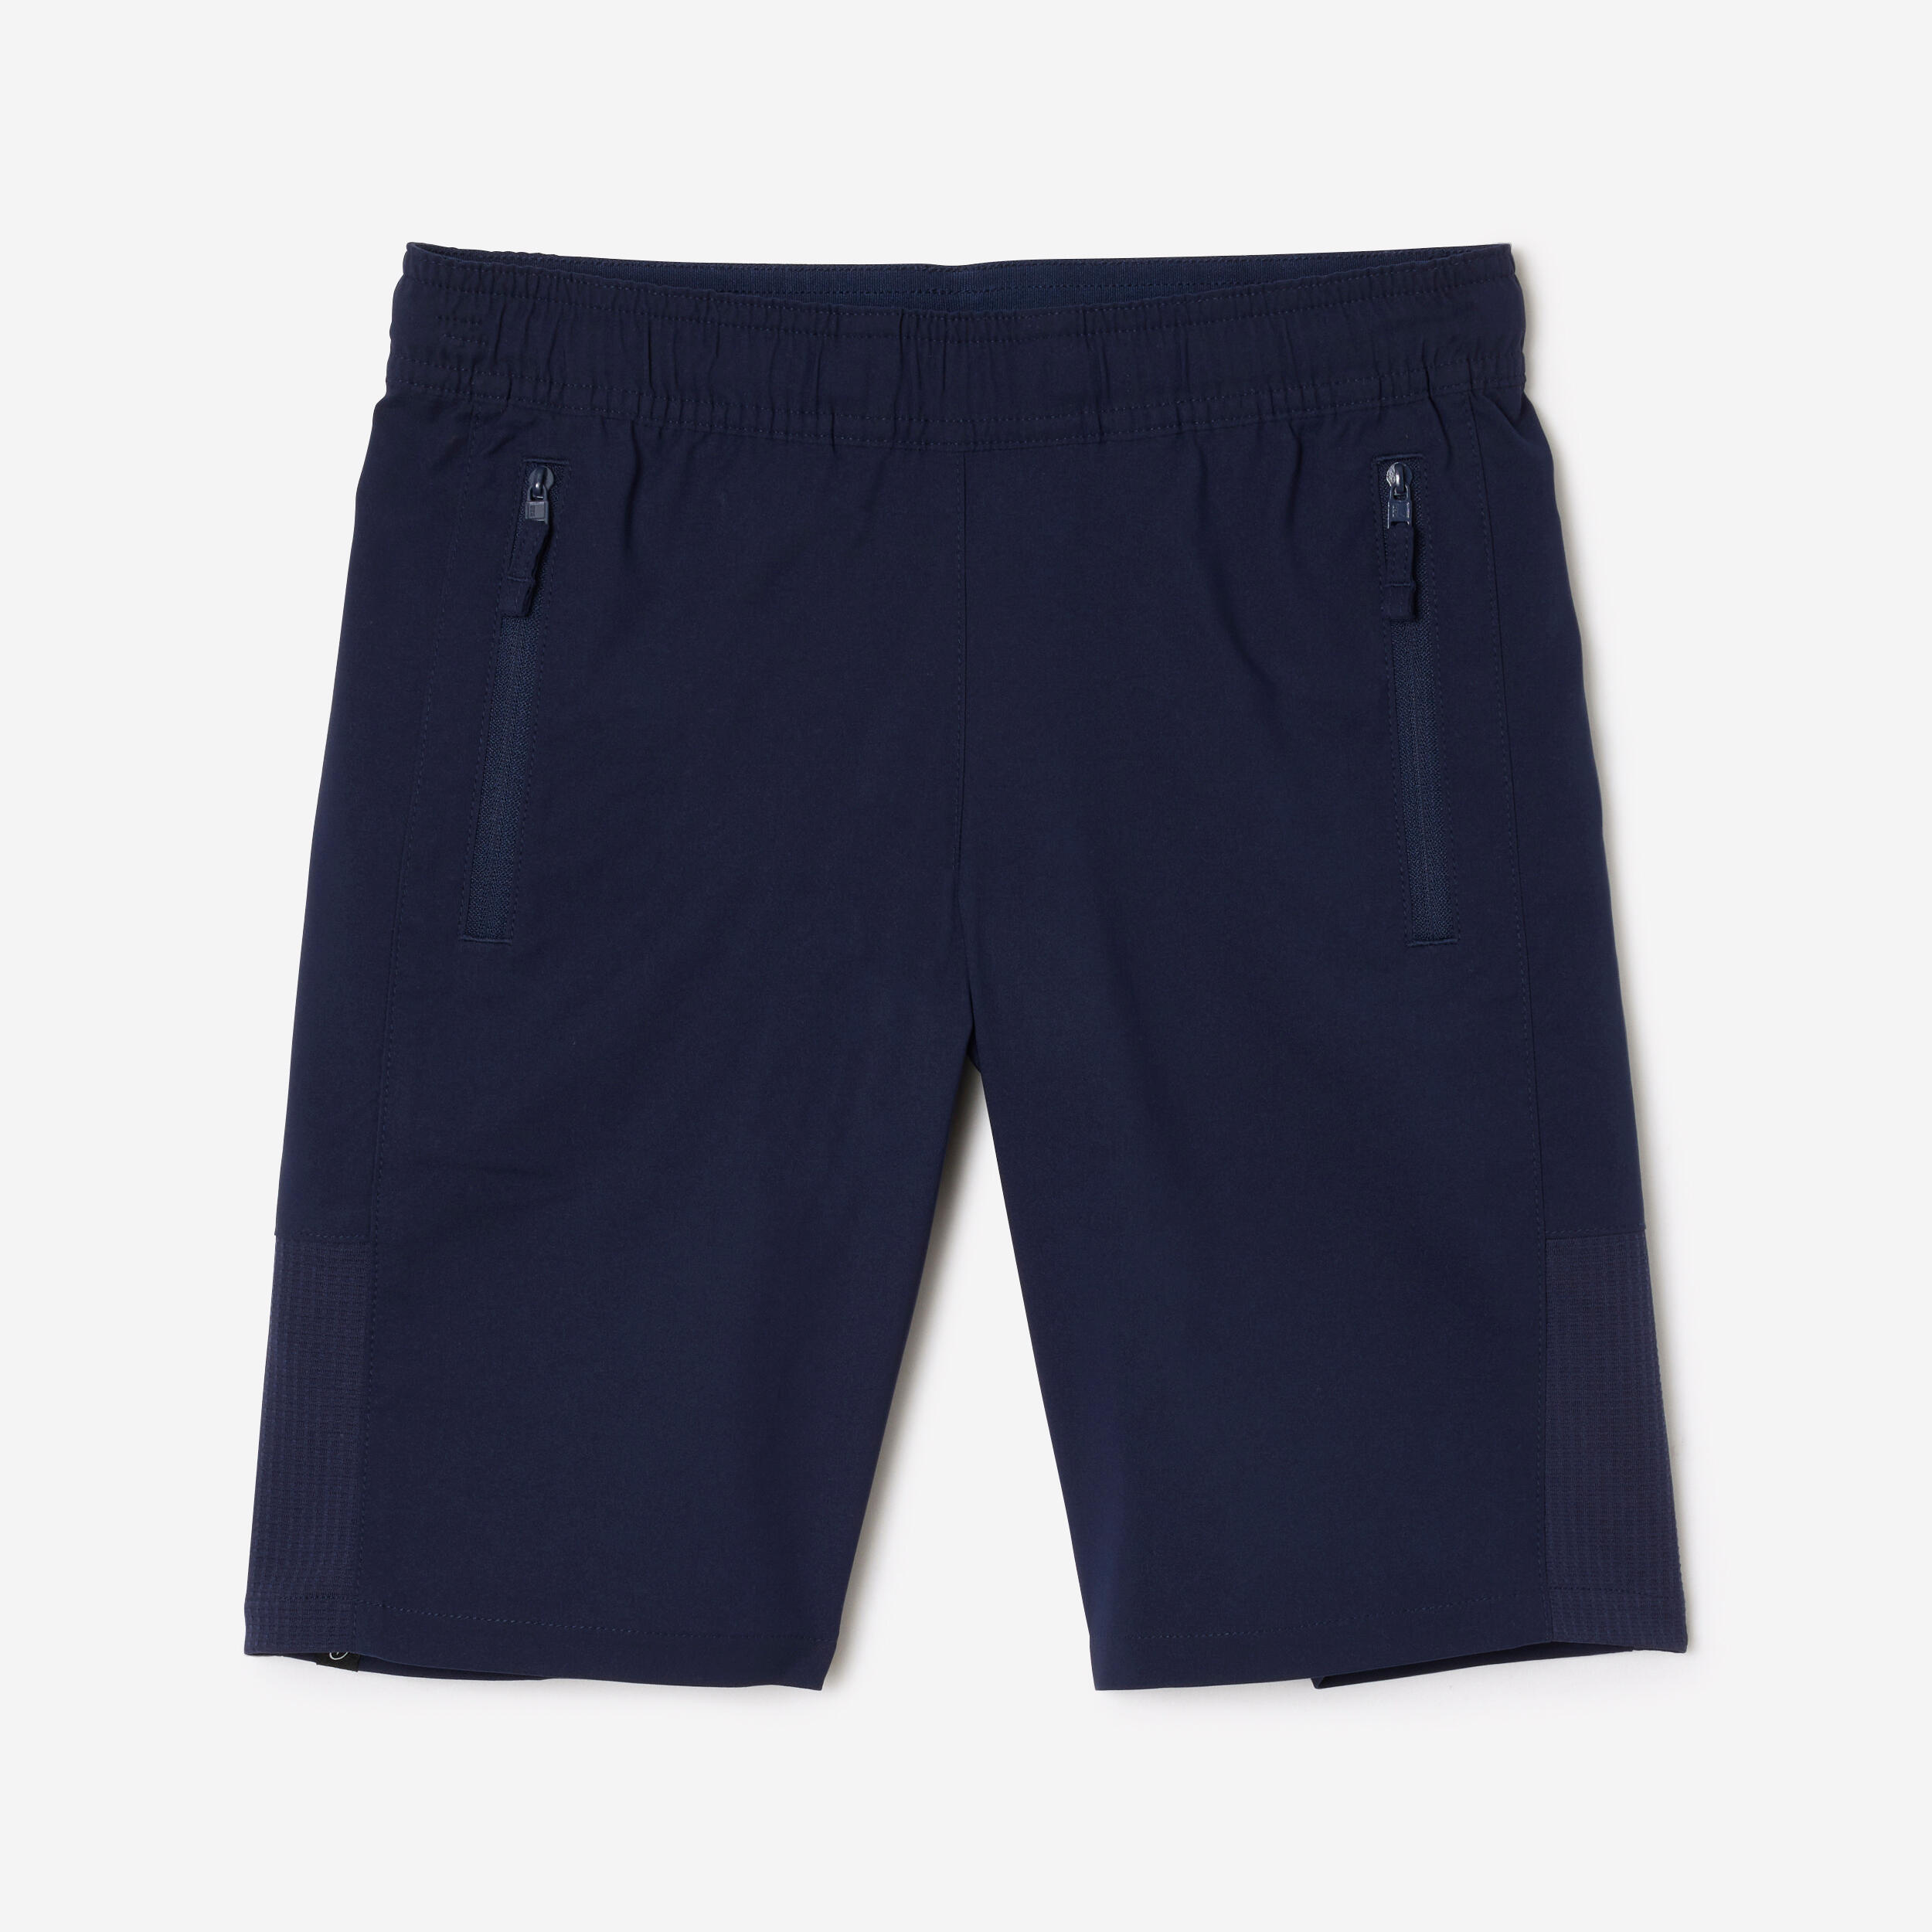 Kids' Breathable Shorts - Navy Blue 1/2